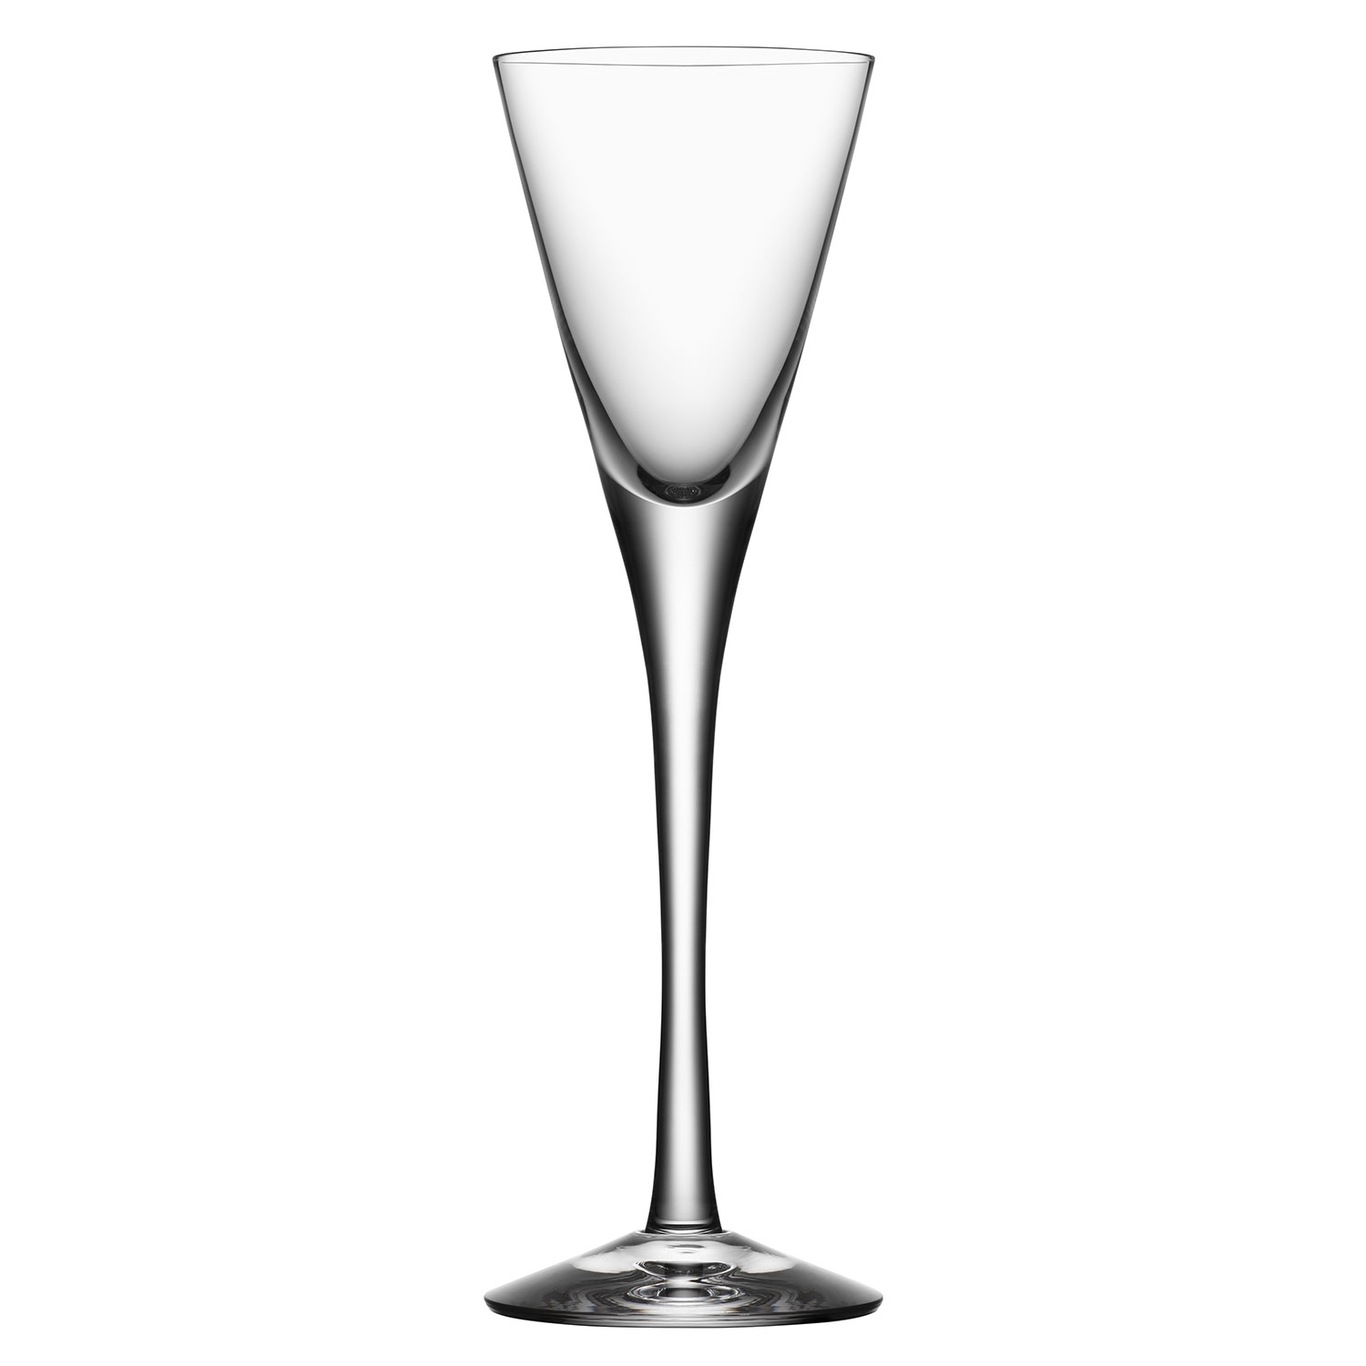 More Schnapps Glass 7 cl, Set Of 2